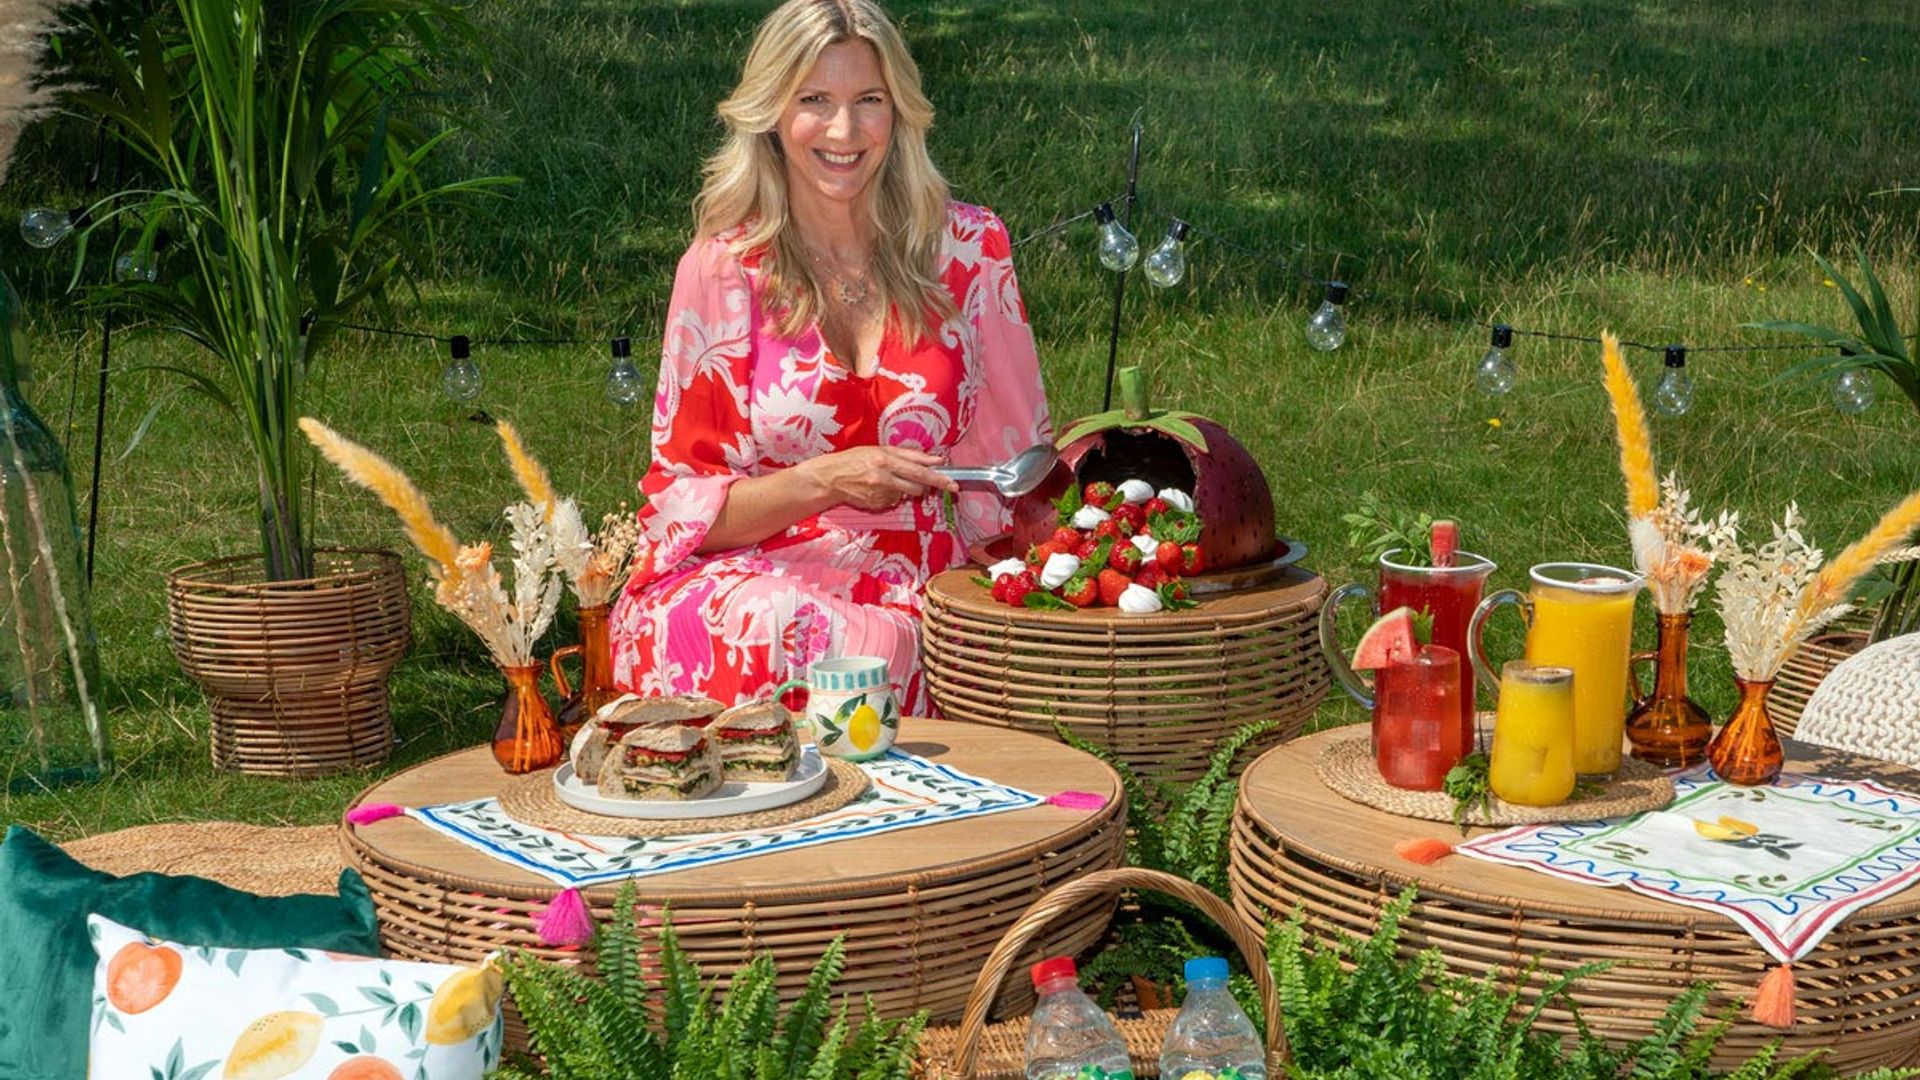 Exclusive: Lisa Faulkner reveals perfect picnic tips & family mealtimes with John Torode